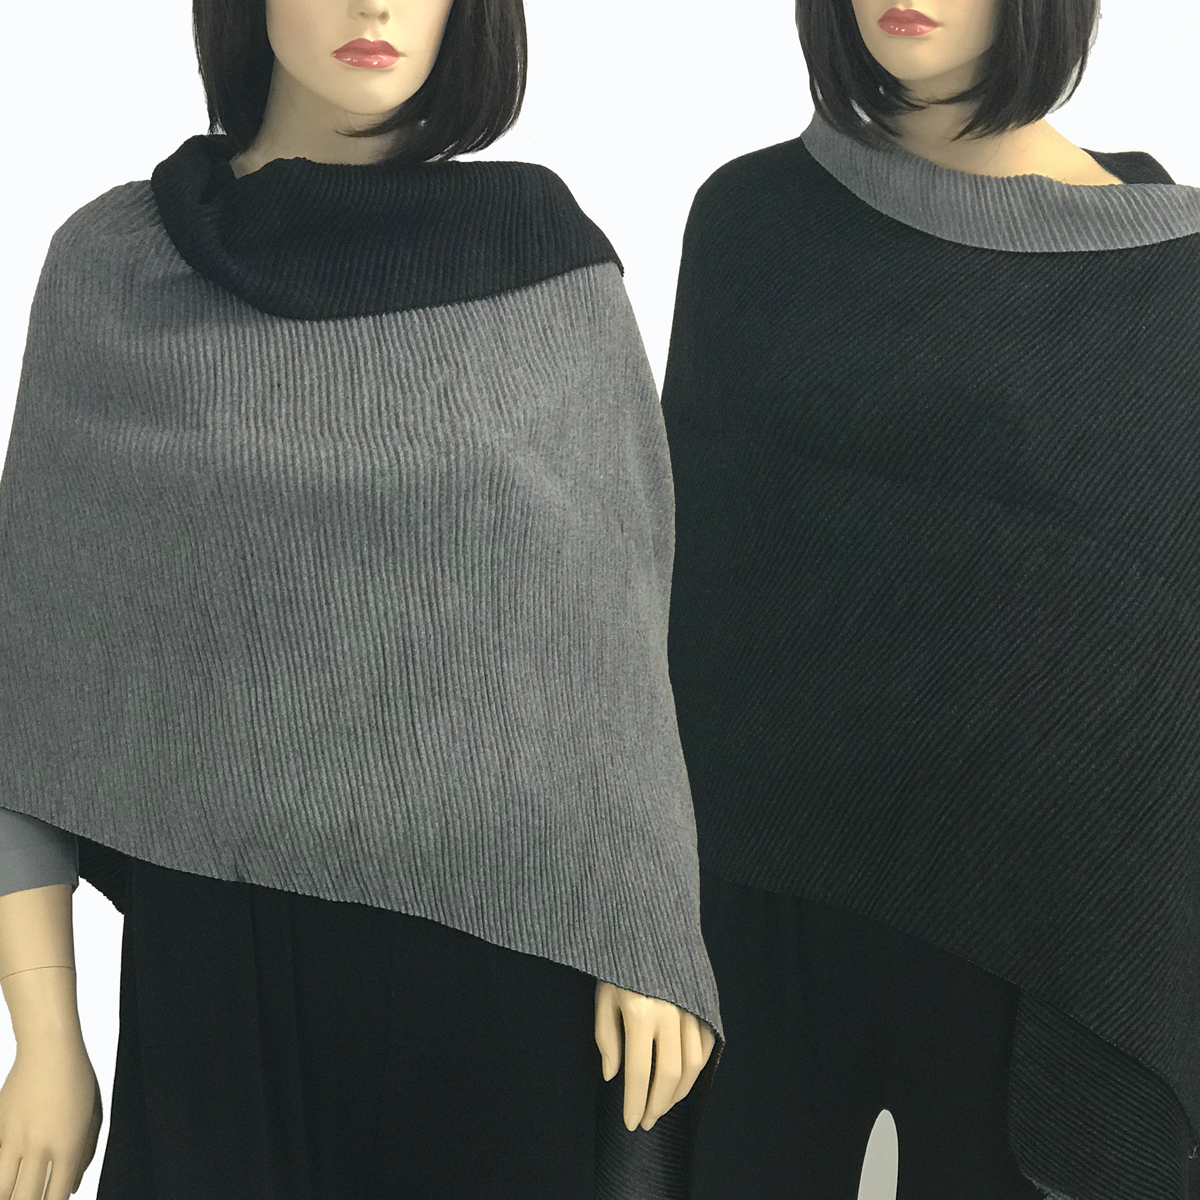 3072 & 3073 - Reversible Pleated Shawls